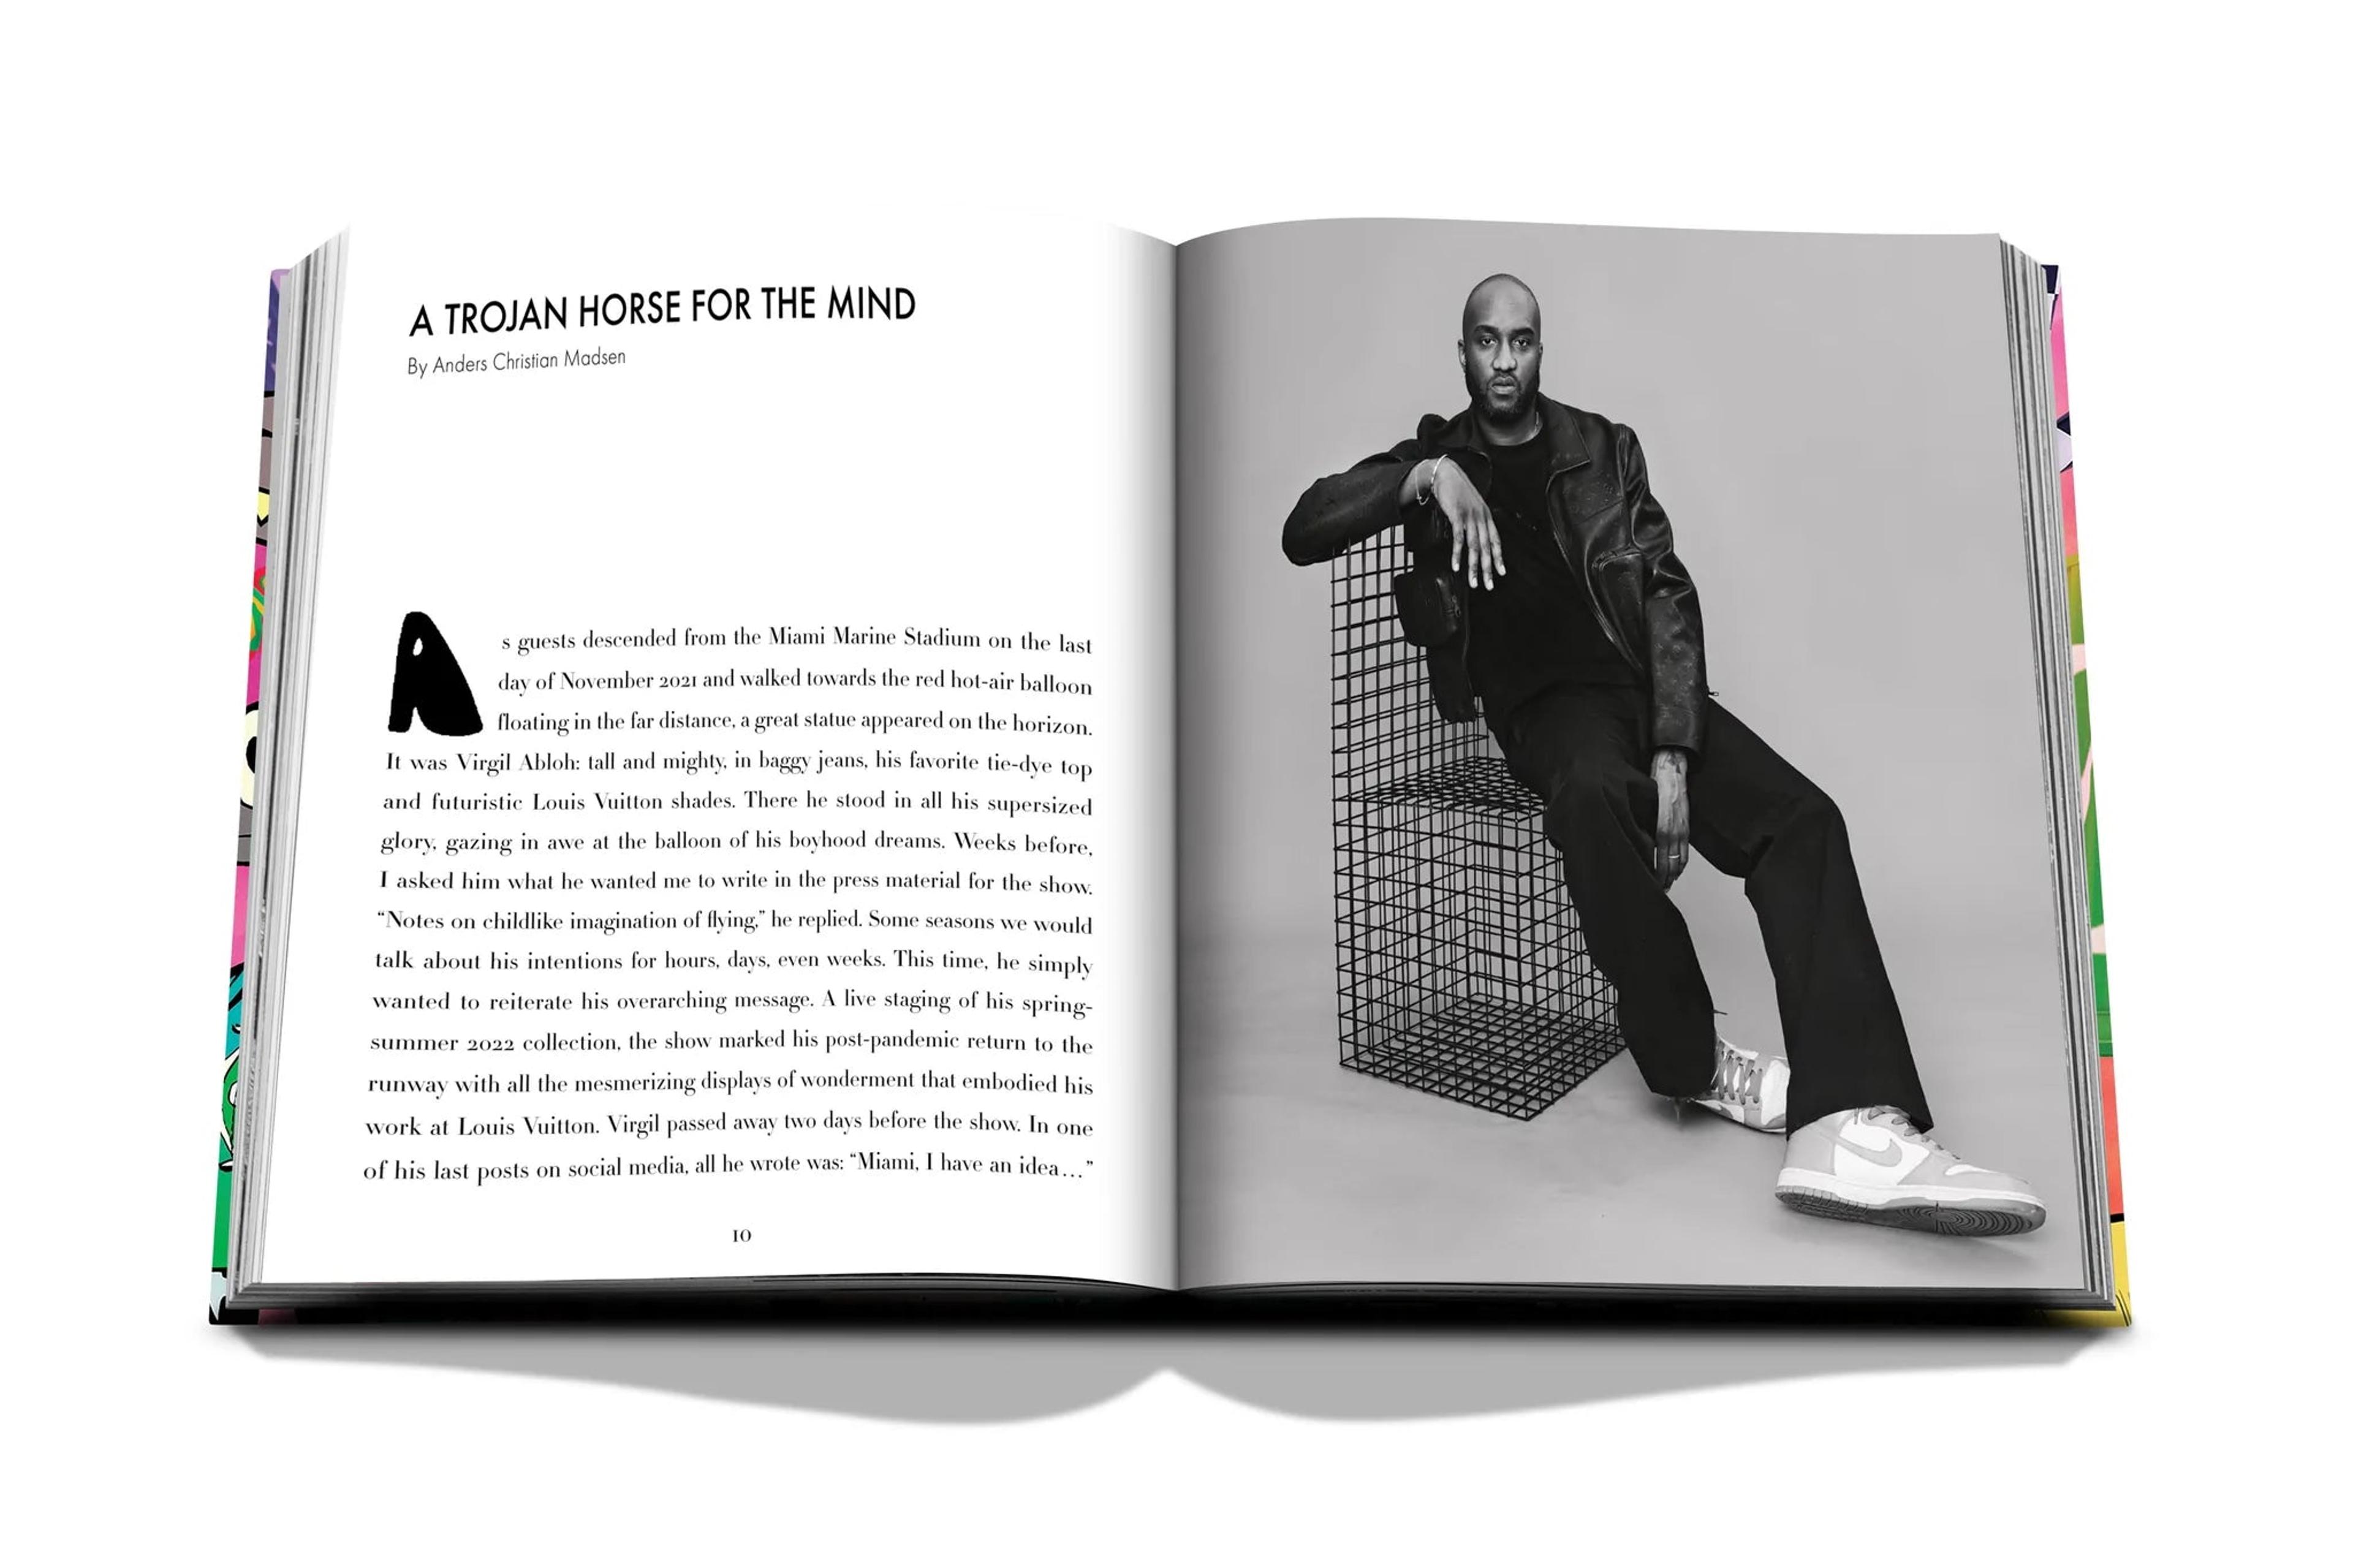 Both Virgil Abloh Book Arrived! Anybody know why they took the book off the  LV site? : r/Louisvuitton